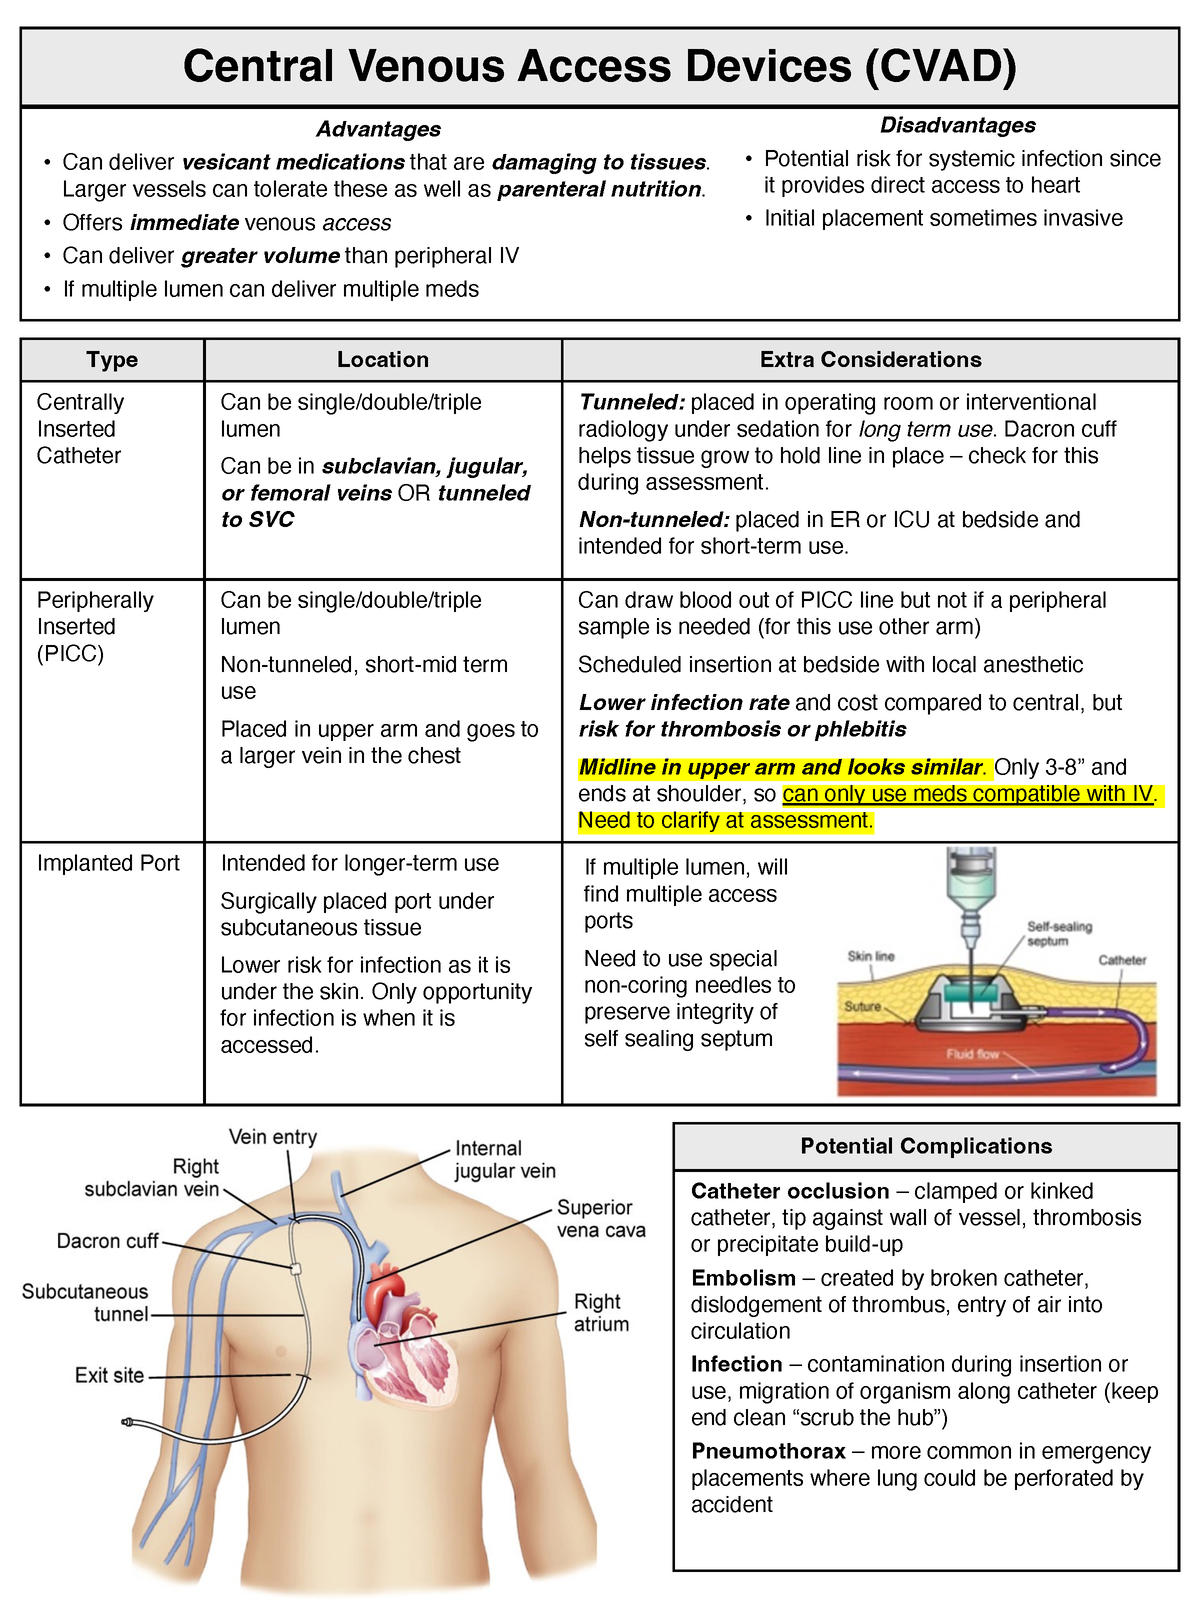 Central lines - Helpful on exam 1 - Central Venous Access Devices (CVAD ...